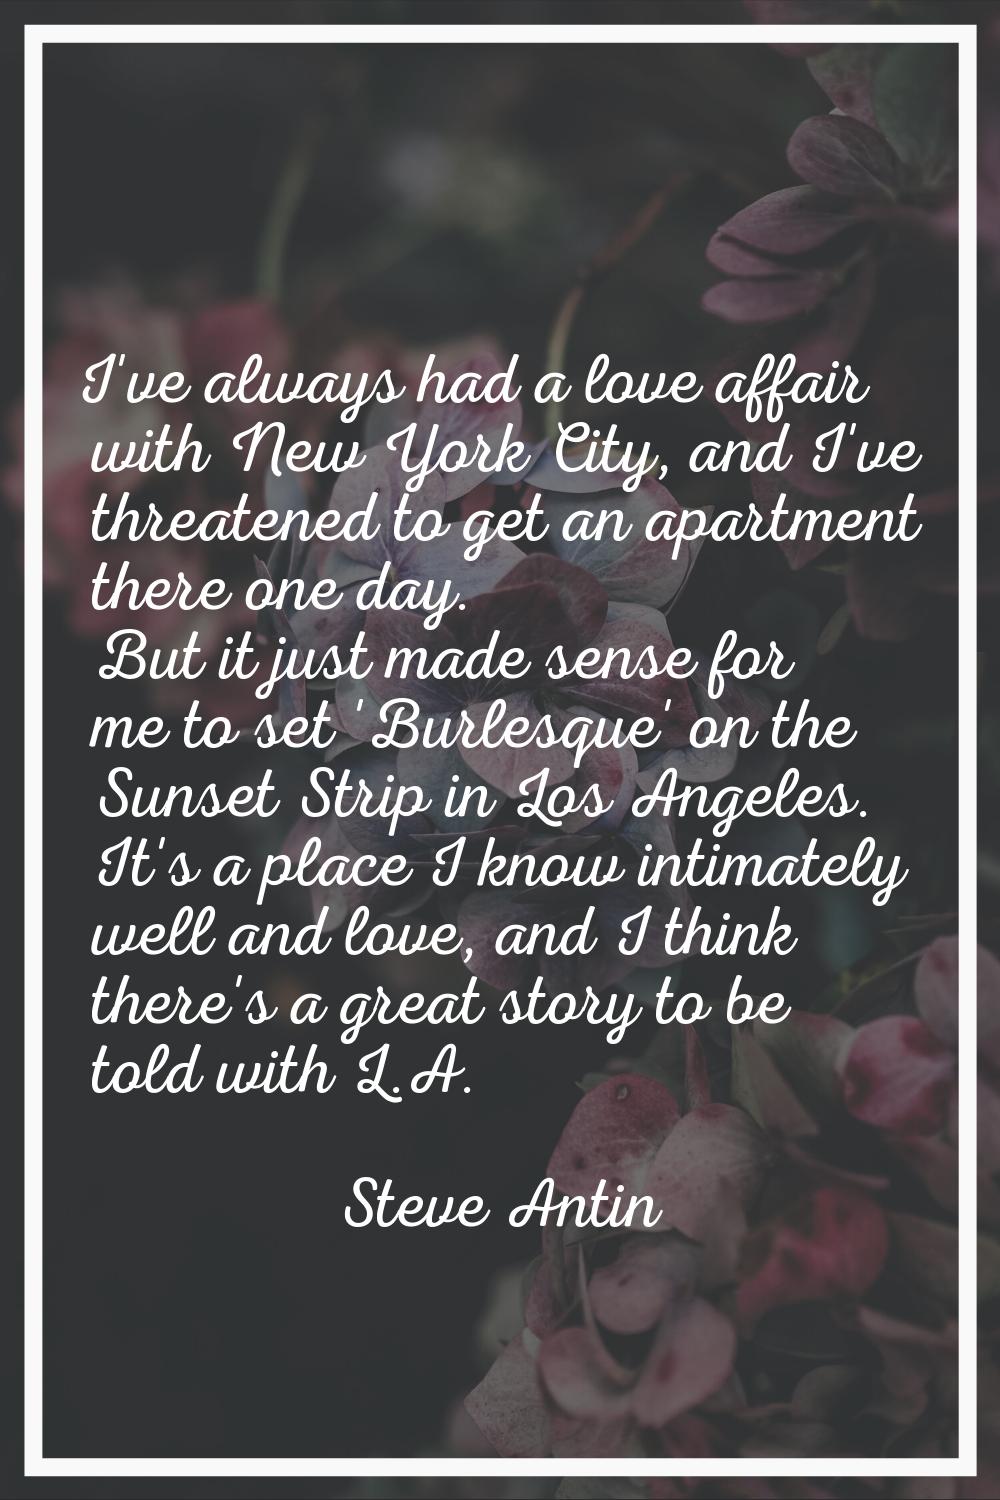 I've always had a love affair with New York City, and I've threatened to get an apartment there one